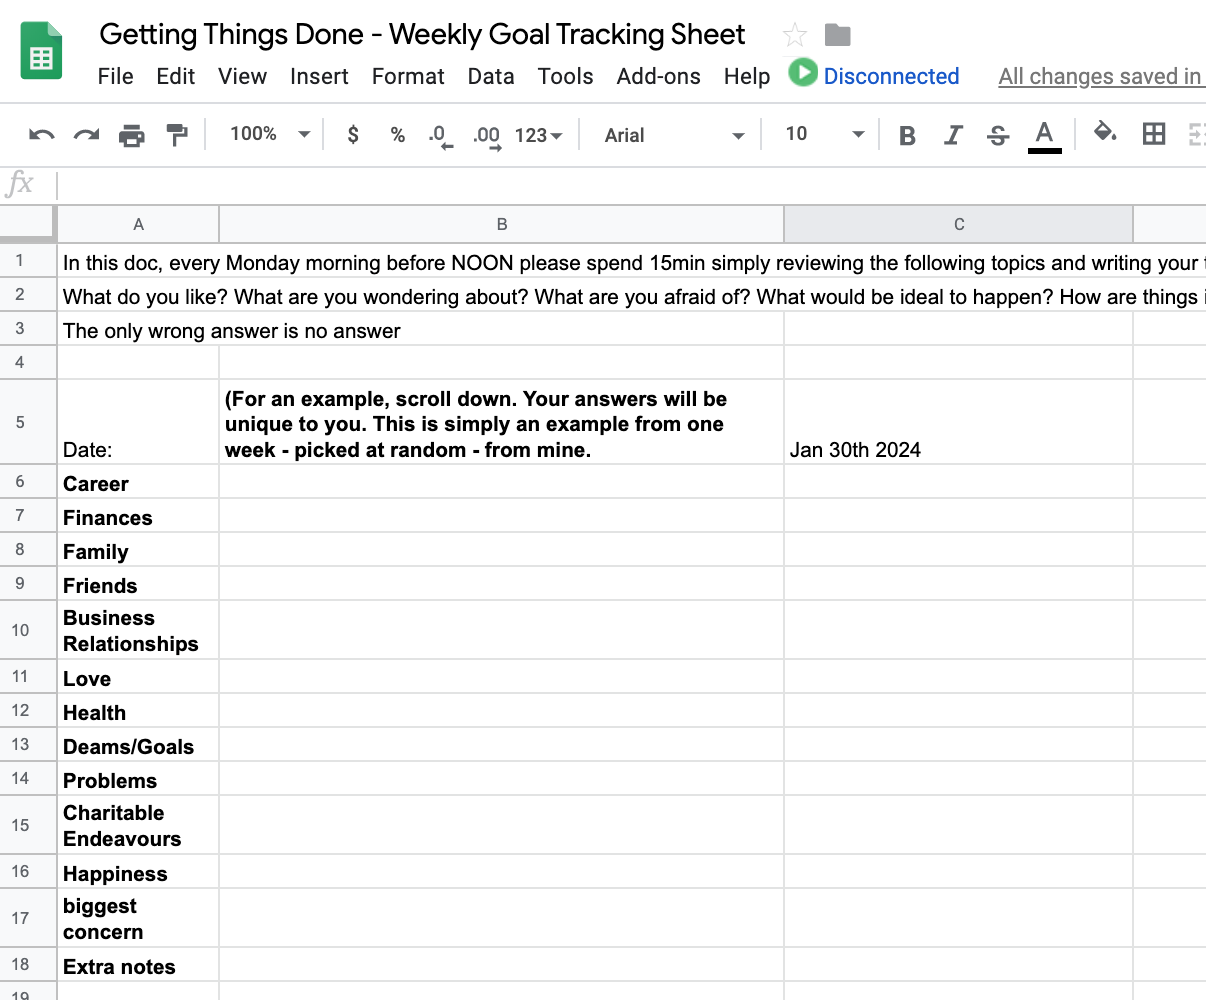 Daily & Weekly Goal Tracking Sheet